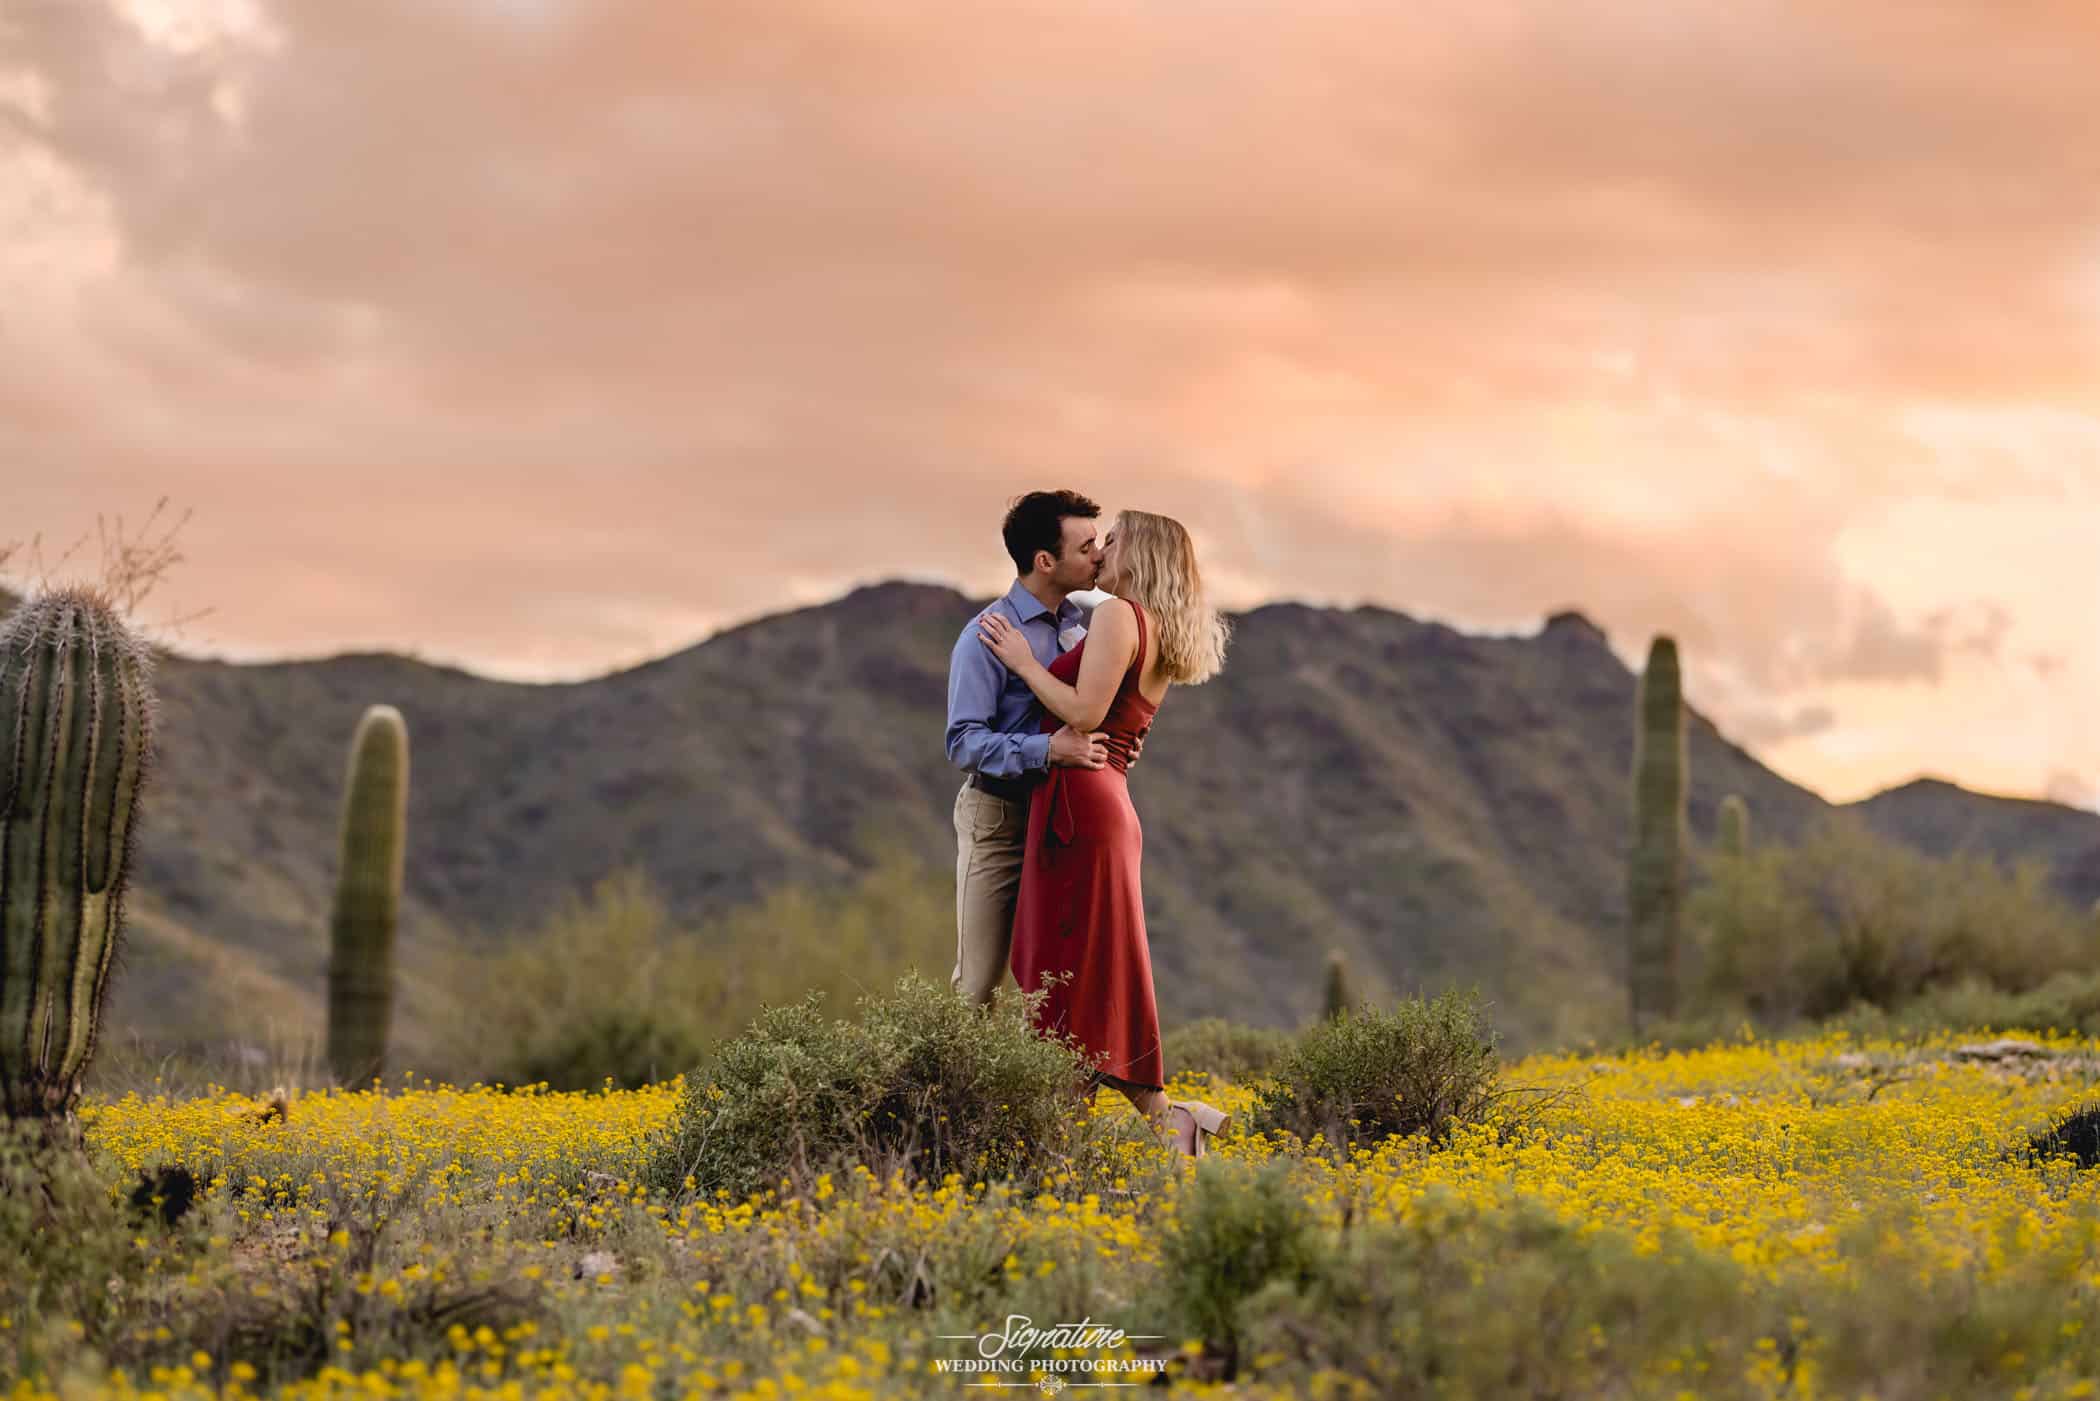 Couple kissing in front of desert mountain